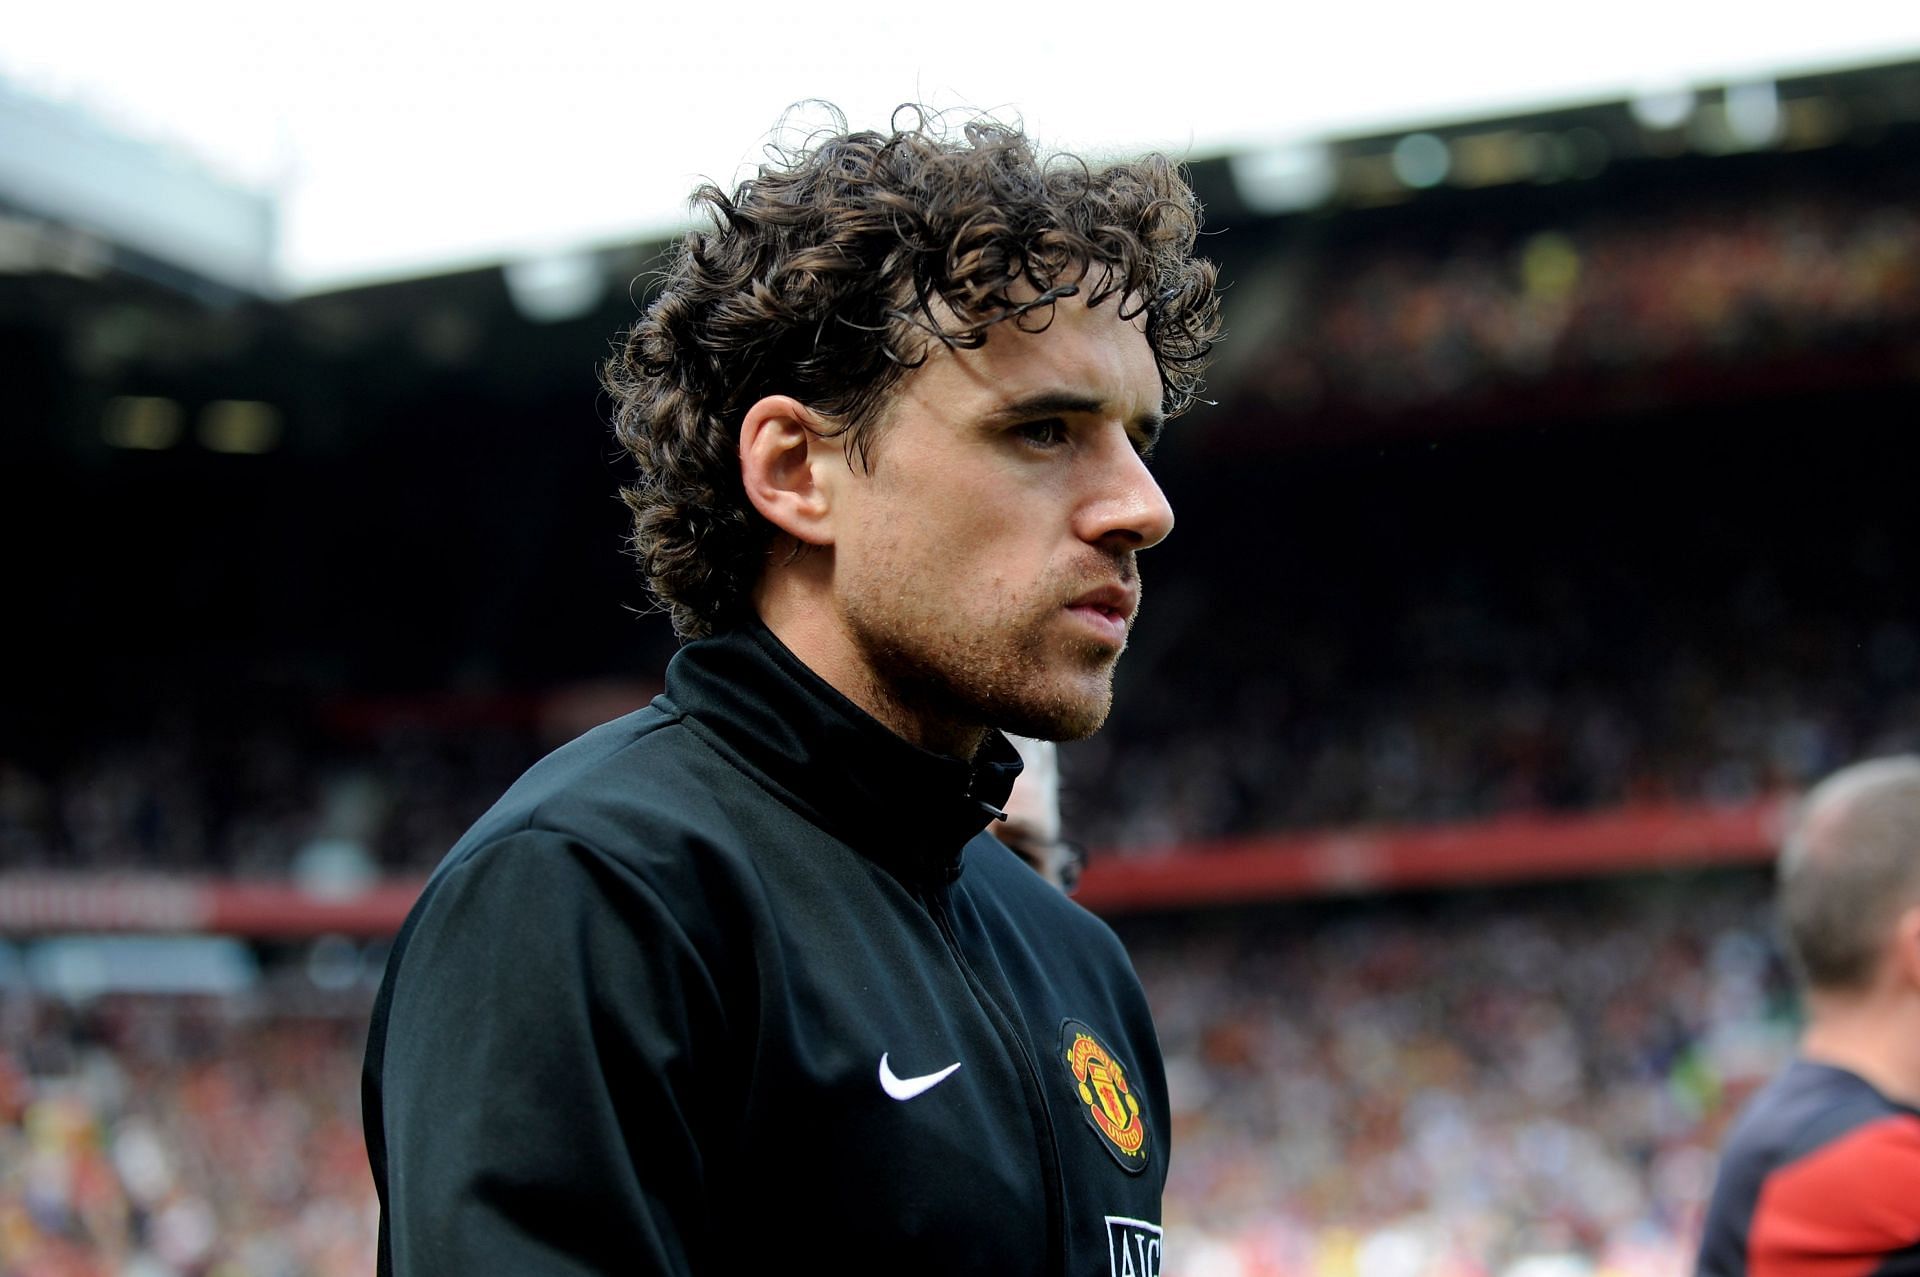 Owen Hargreaves is backing Bayern Munich to beat Manchester United.